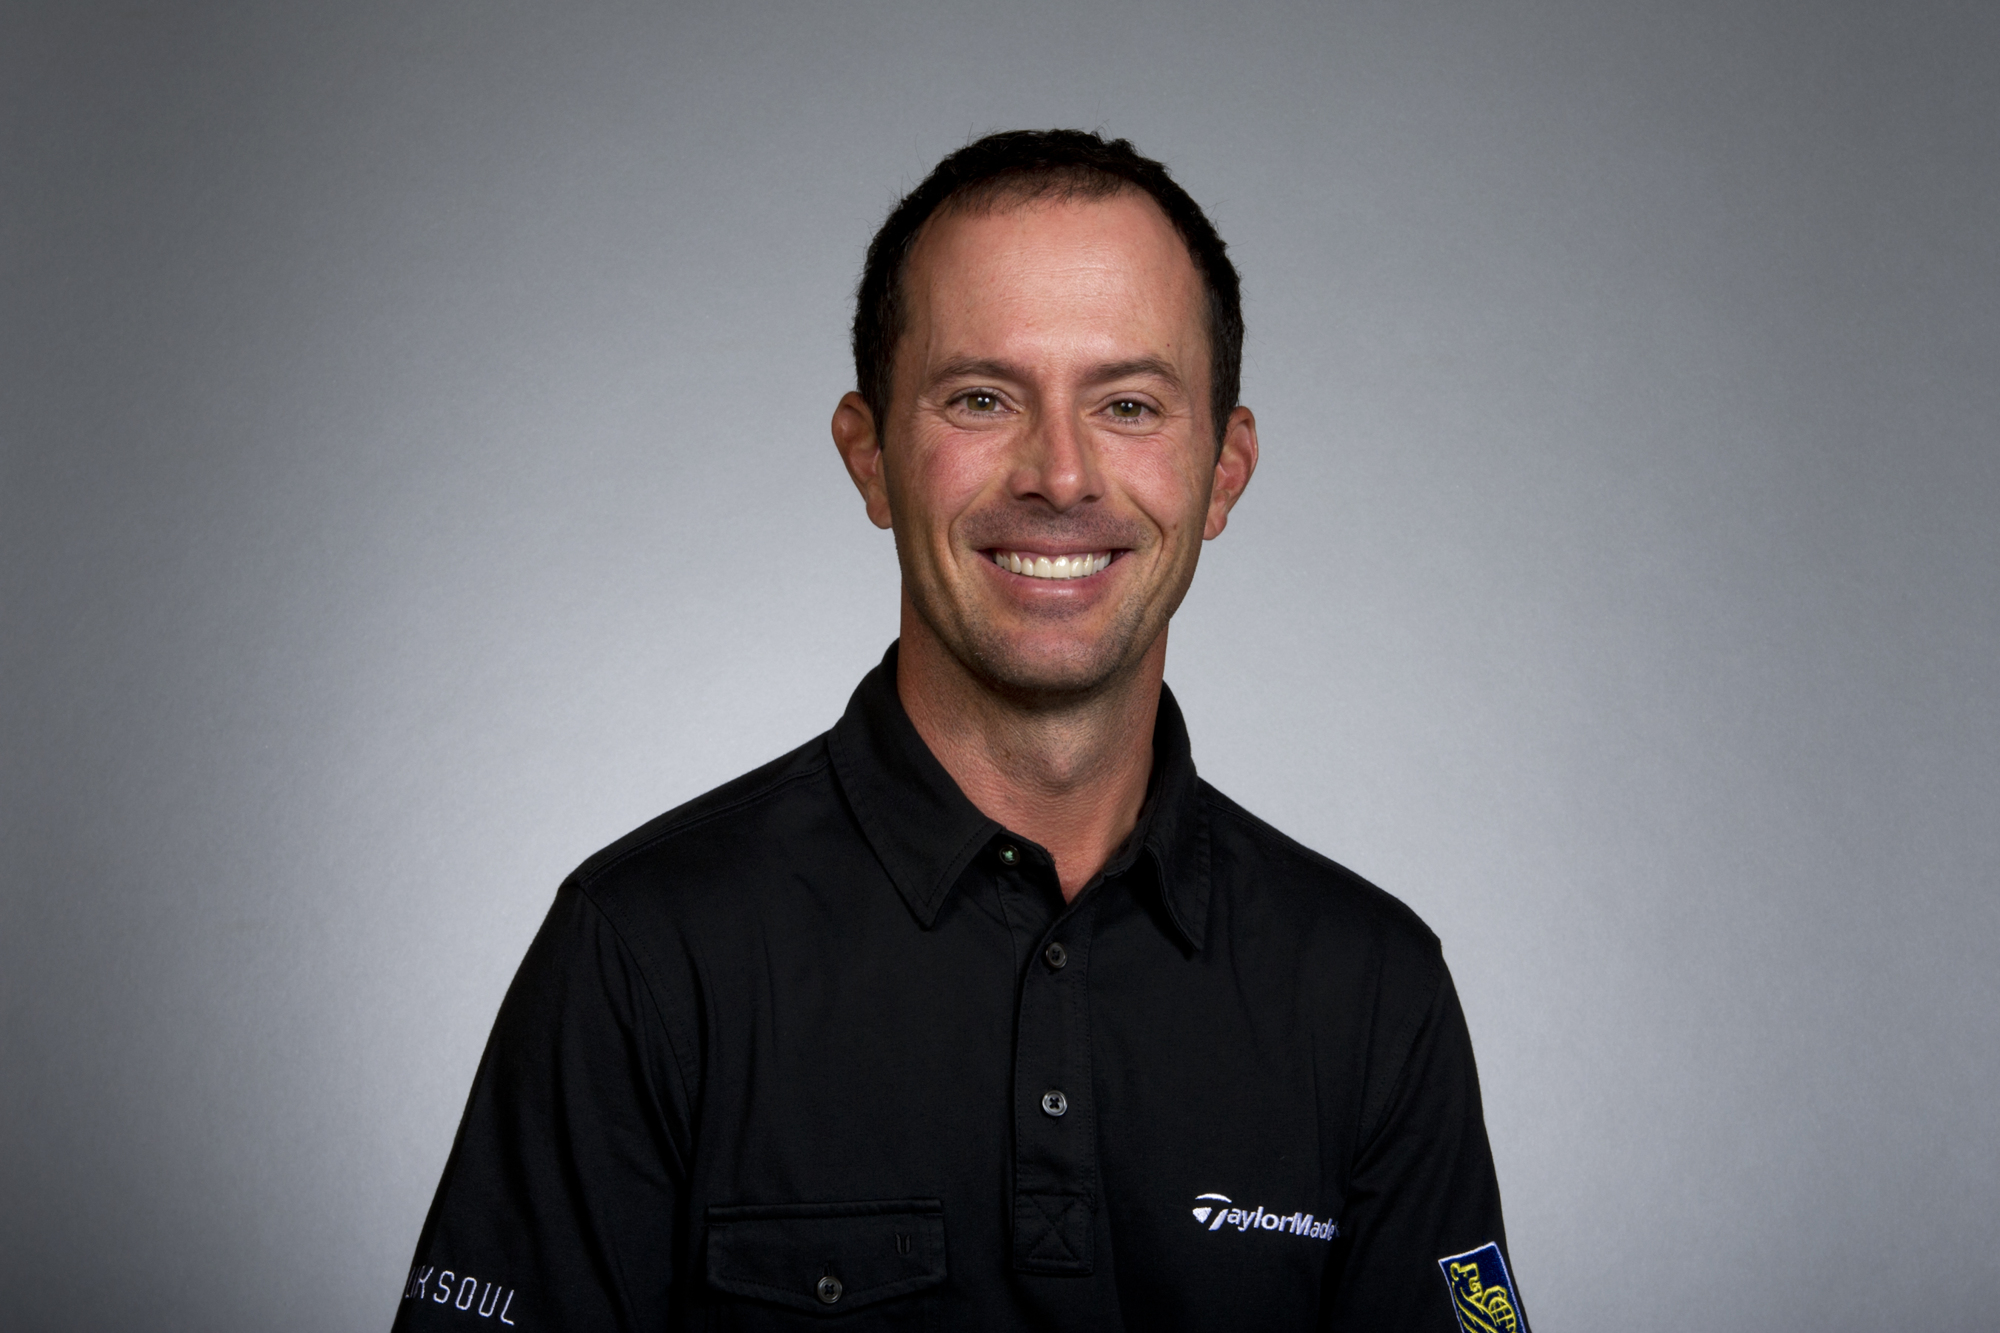 2. Mike Weir was the first Canadian and the first left-handed golfer to win the Masters, in 2003. Photo courtesy PGA Tour Media.